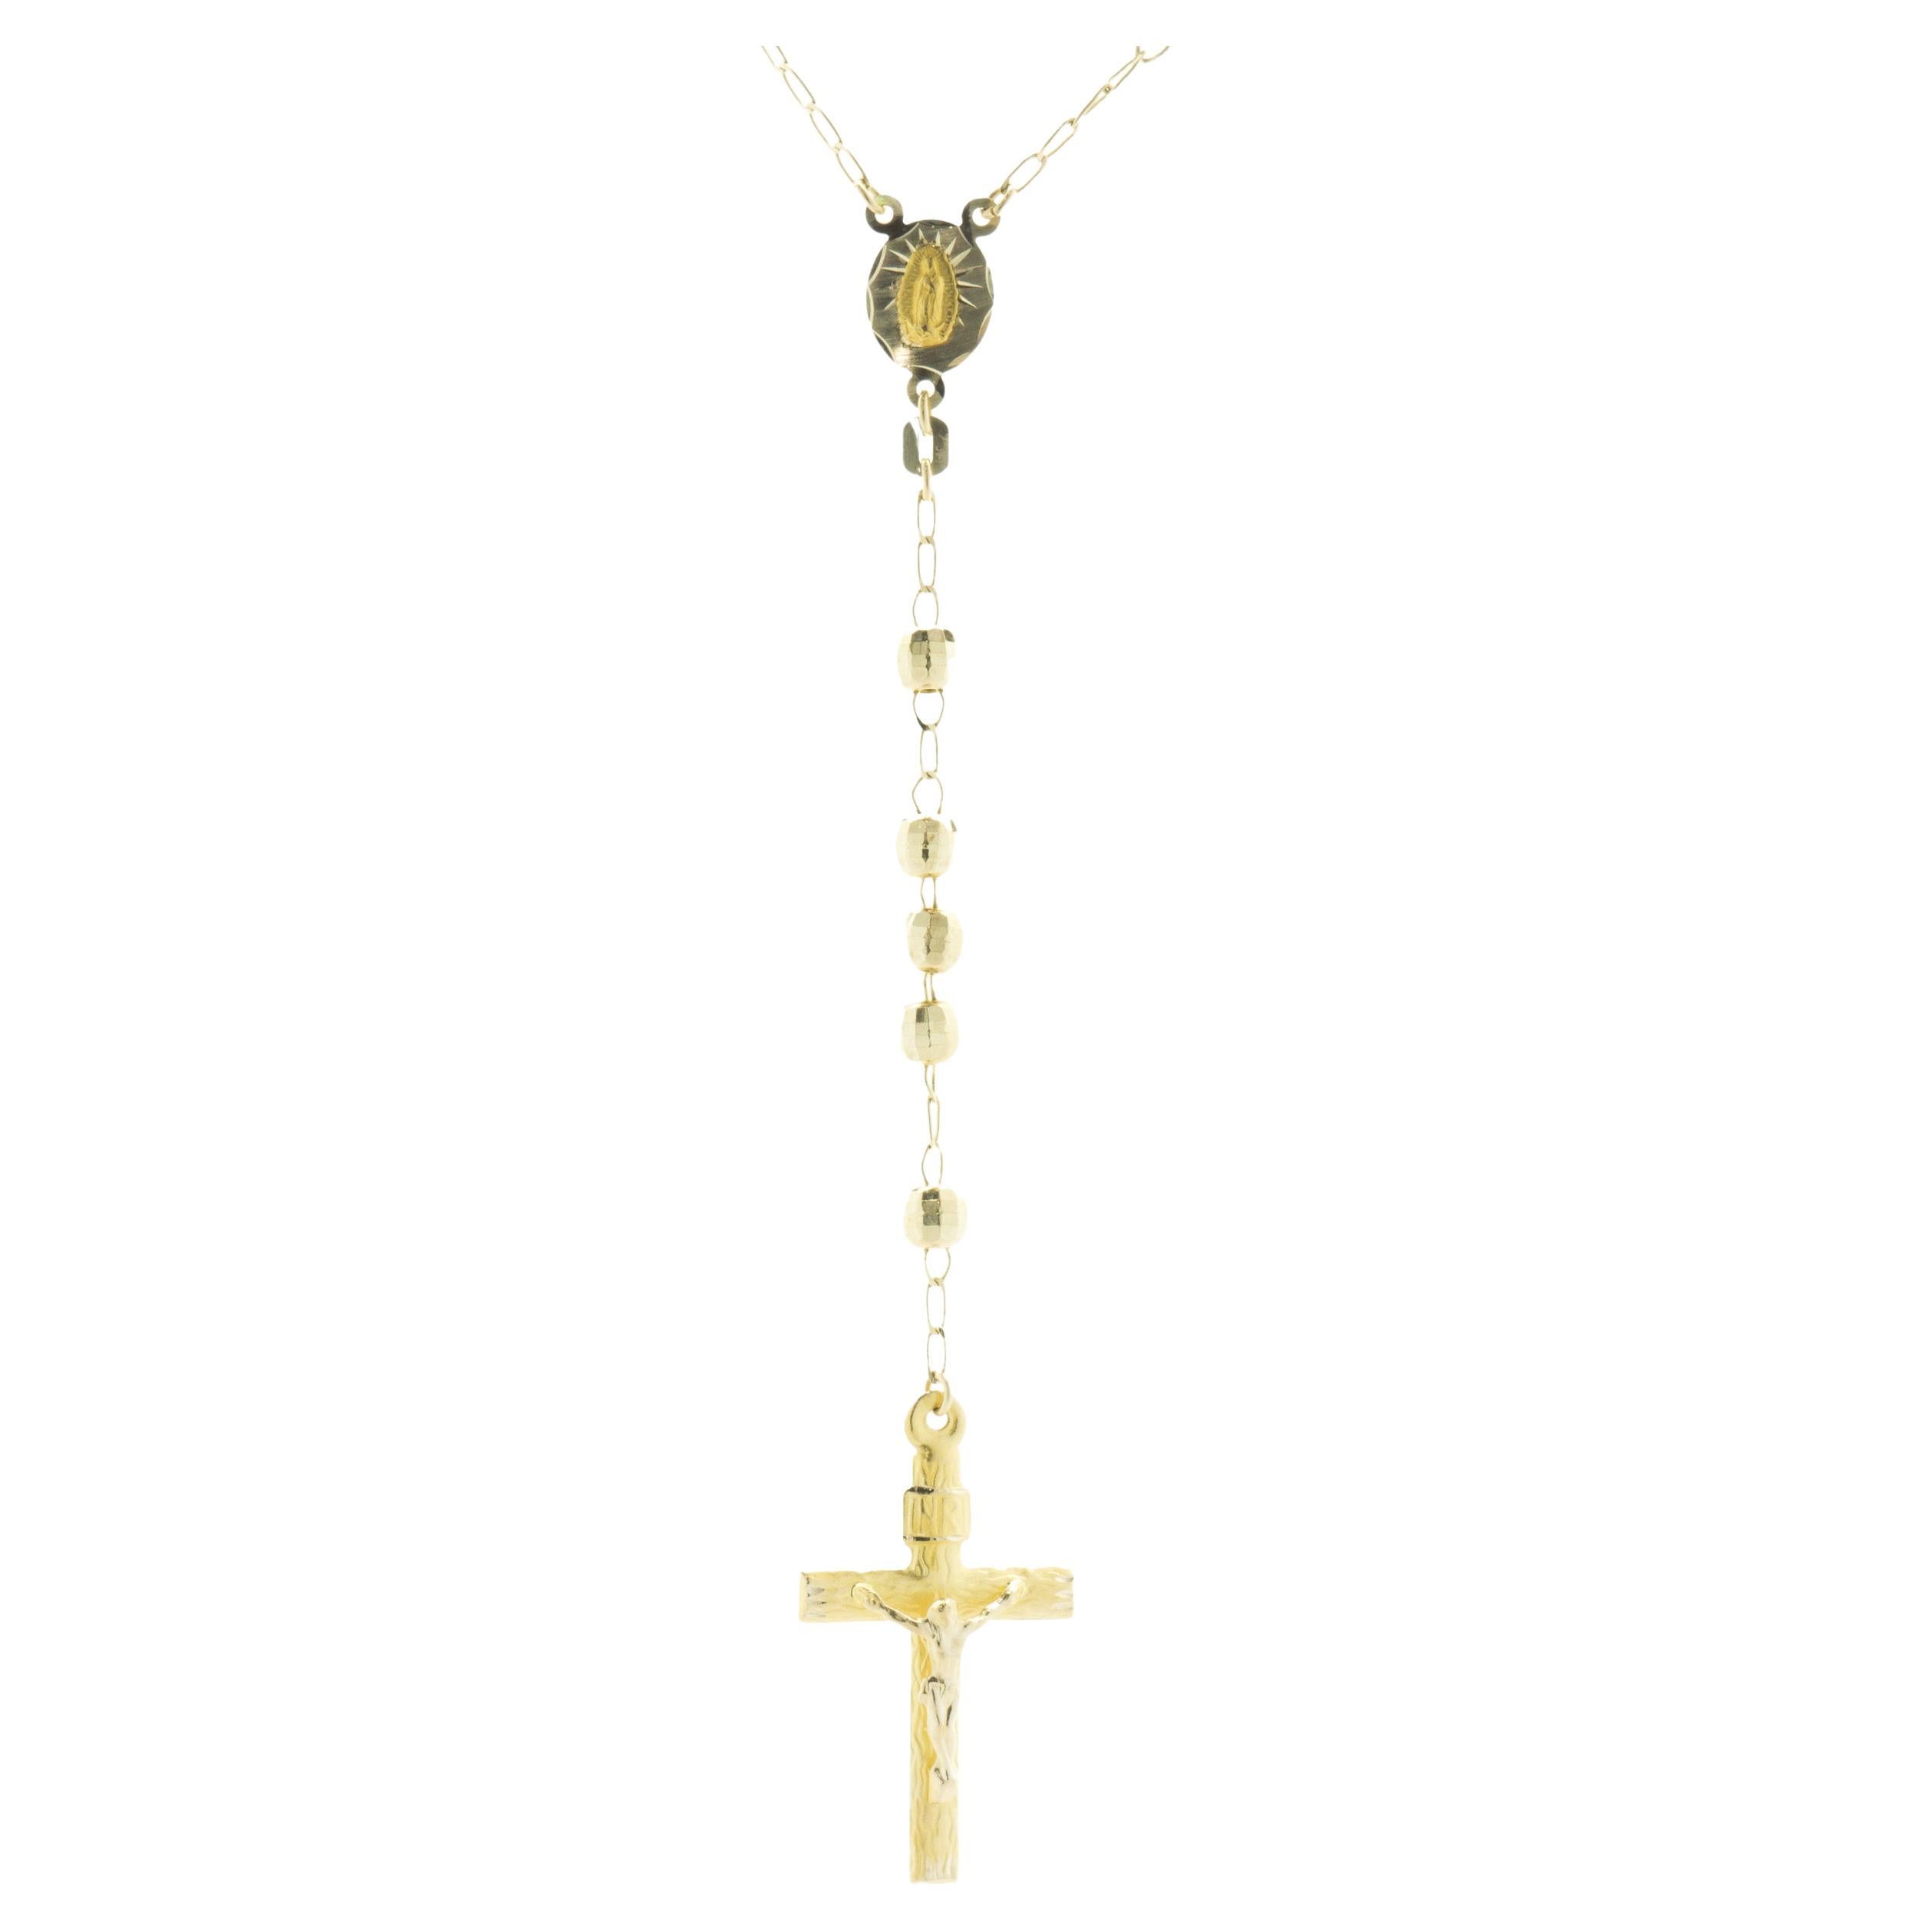 How do you know if a rosary is antique?